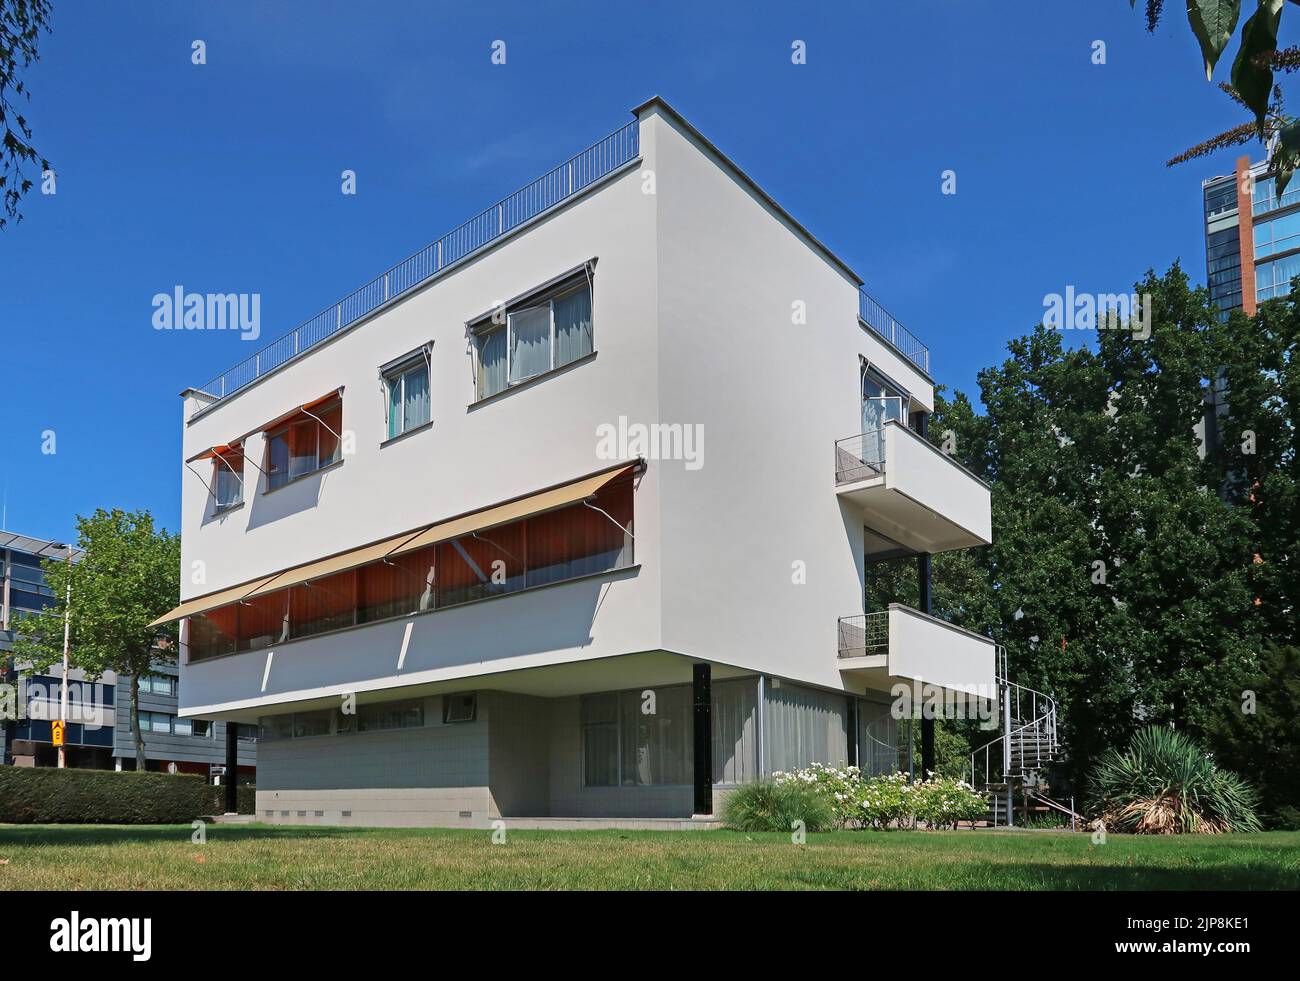 Rotterdam, Netherlands. Exterior view of Huis Sonneveld, the 1930s modernist house now refurbished maintained as a museum. Stock Photo